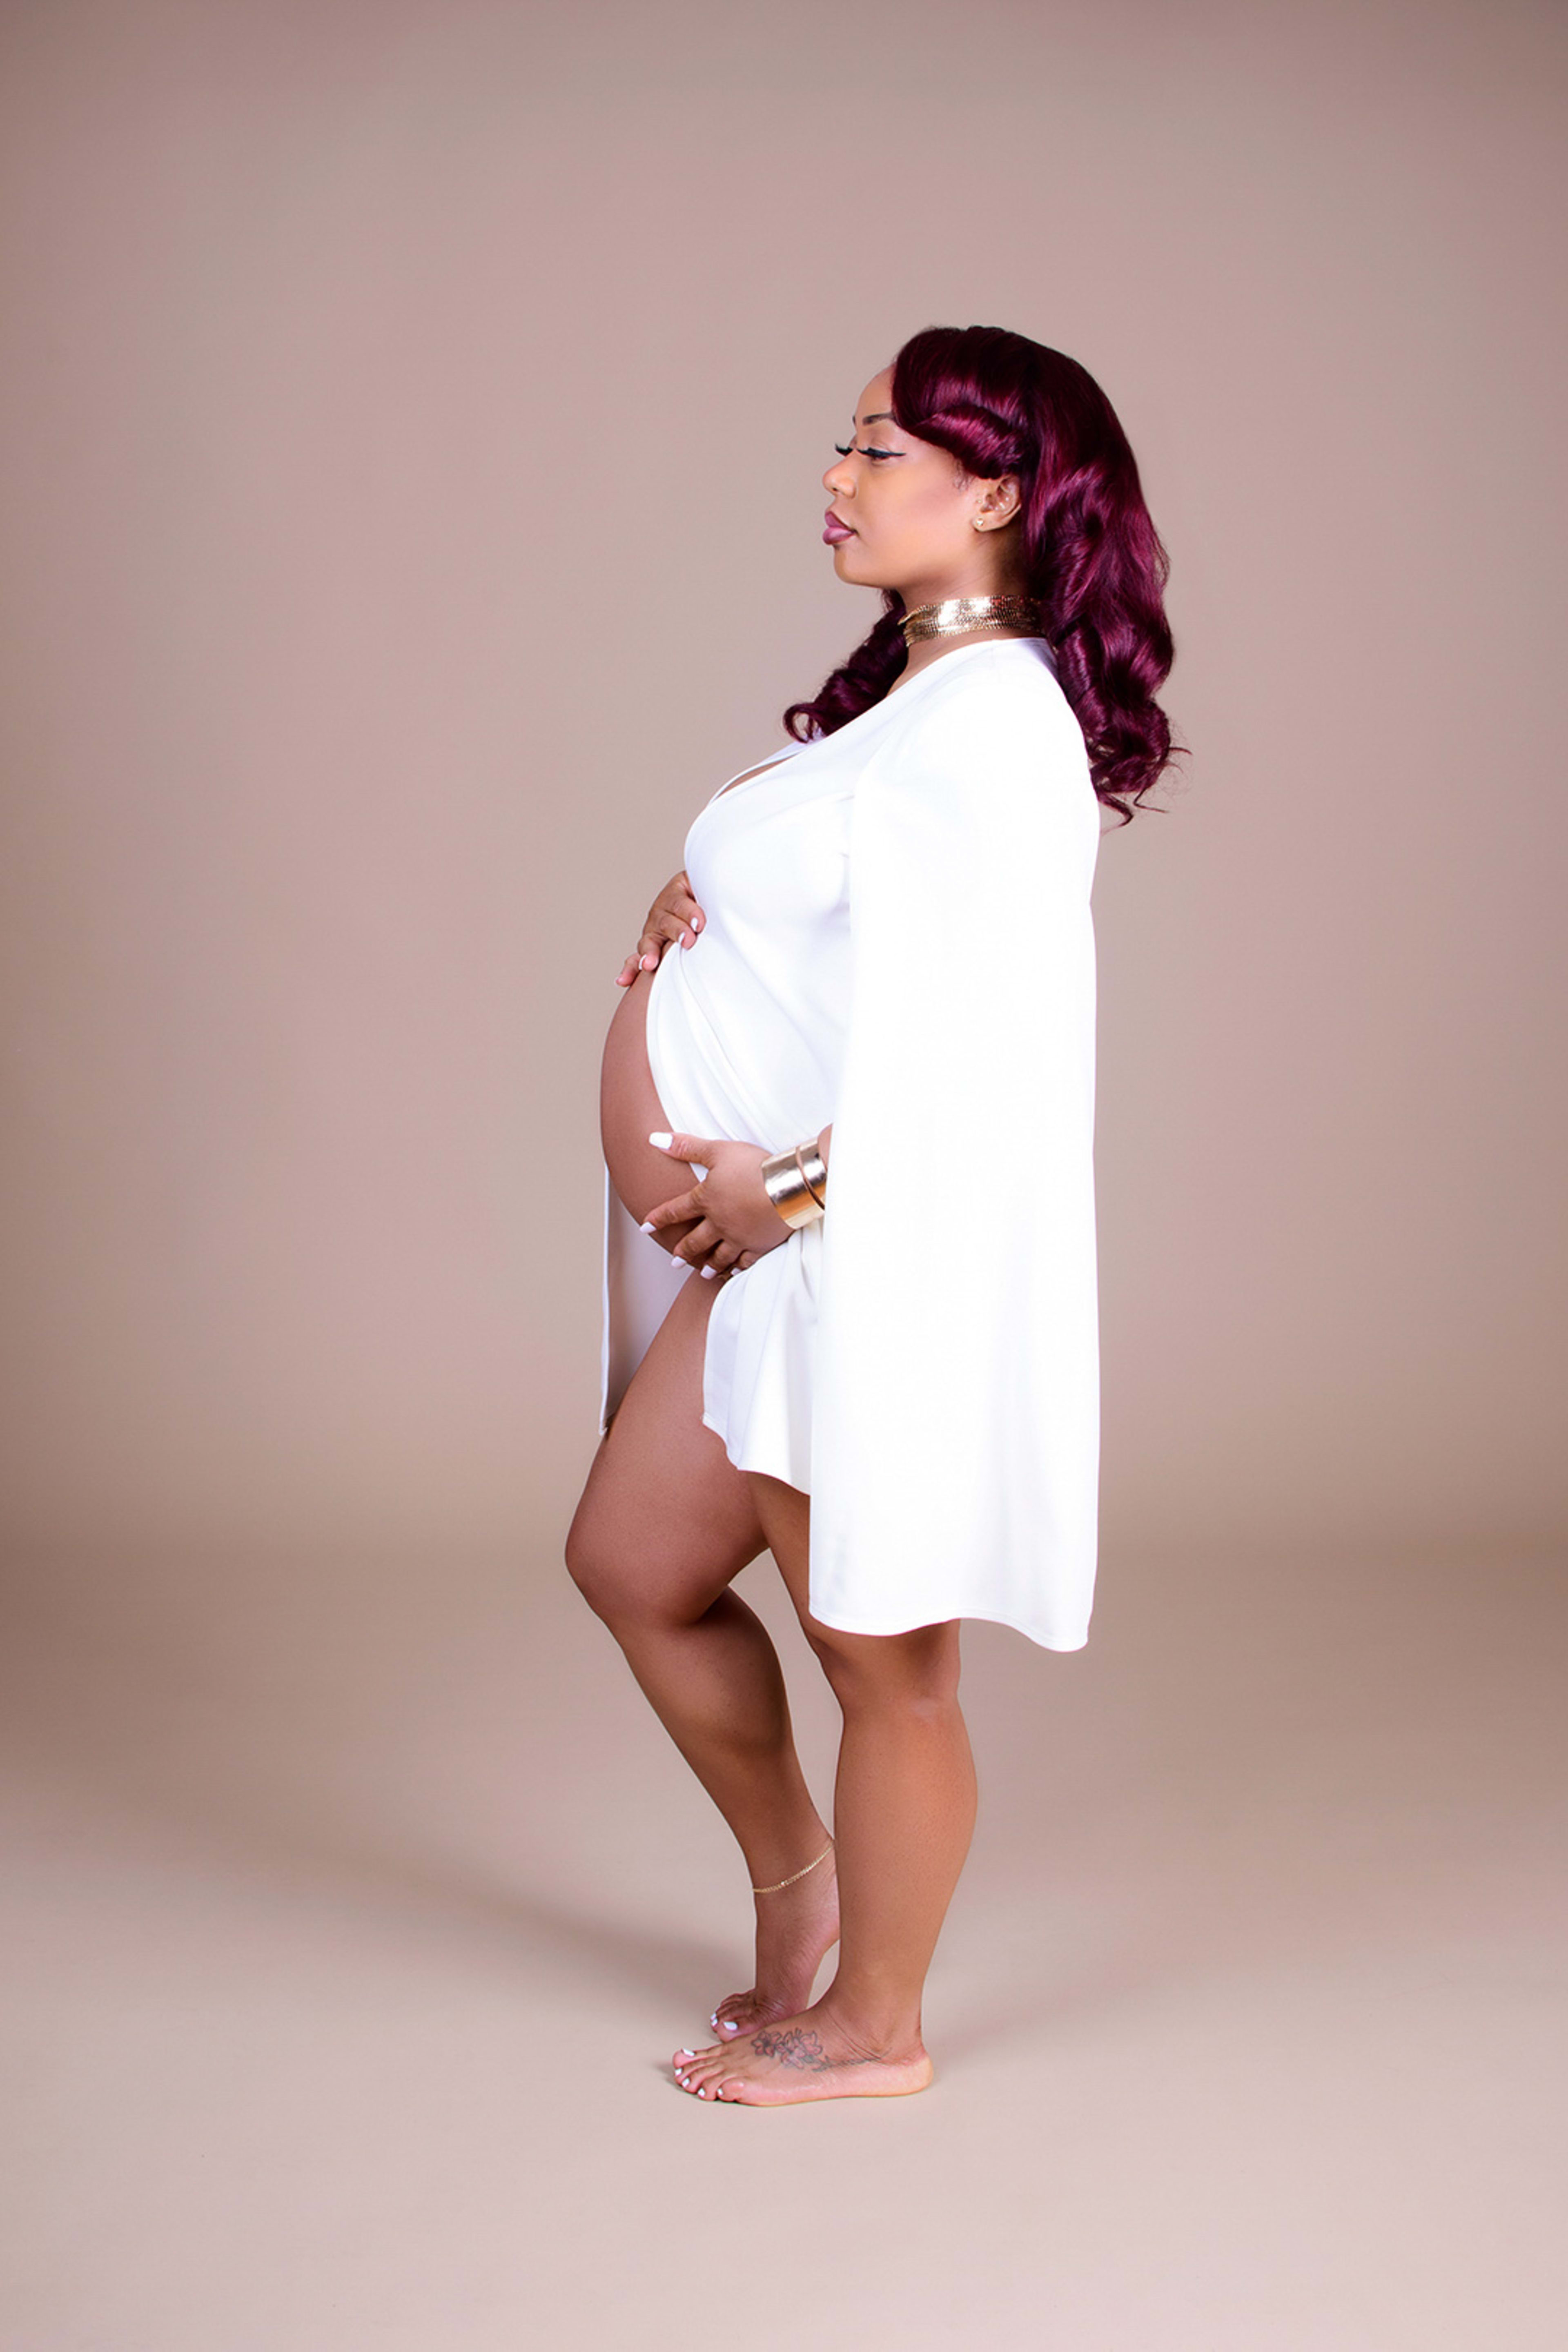 A maternity photoshoot with a pregnant woman wearing a white dress.